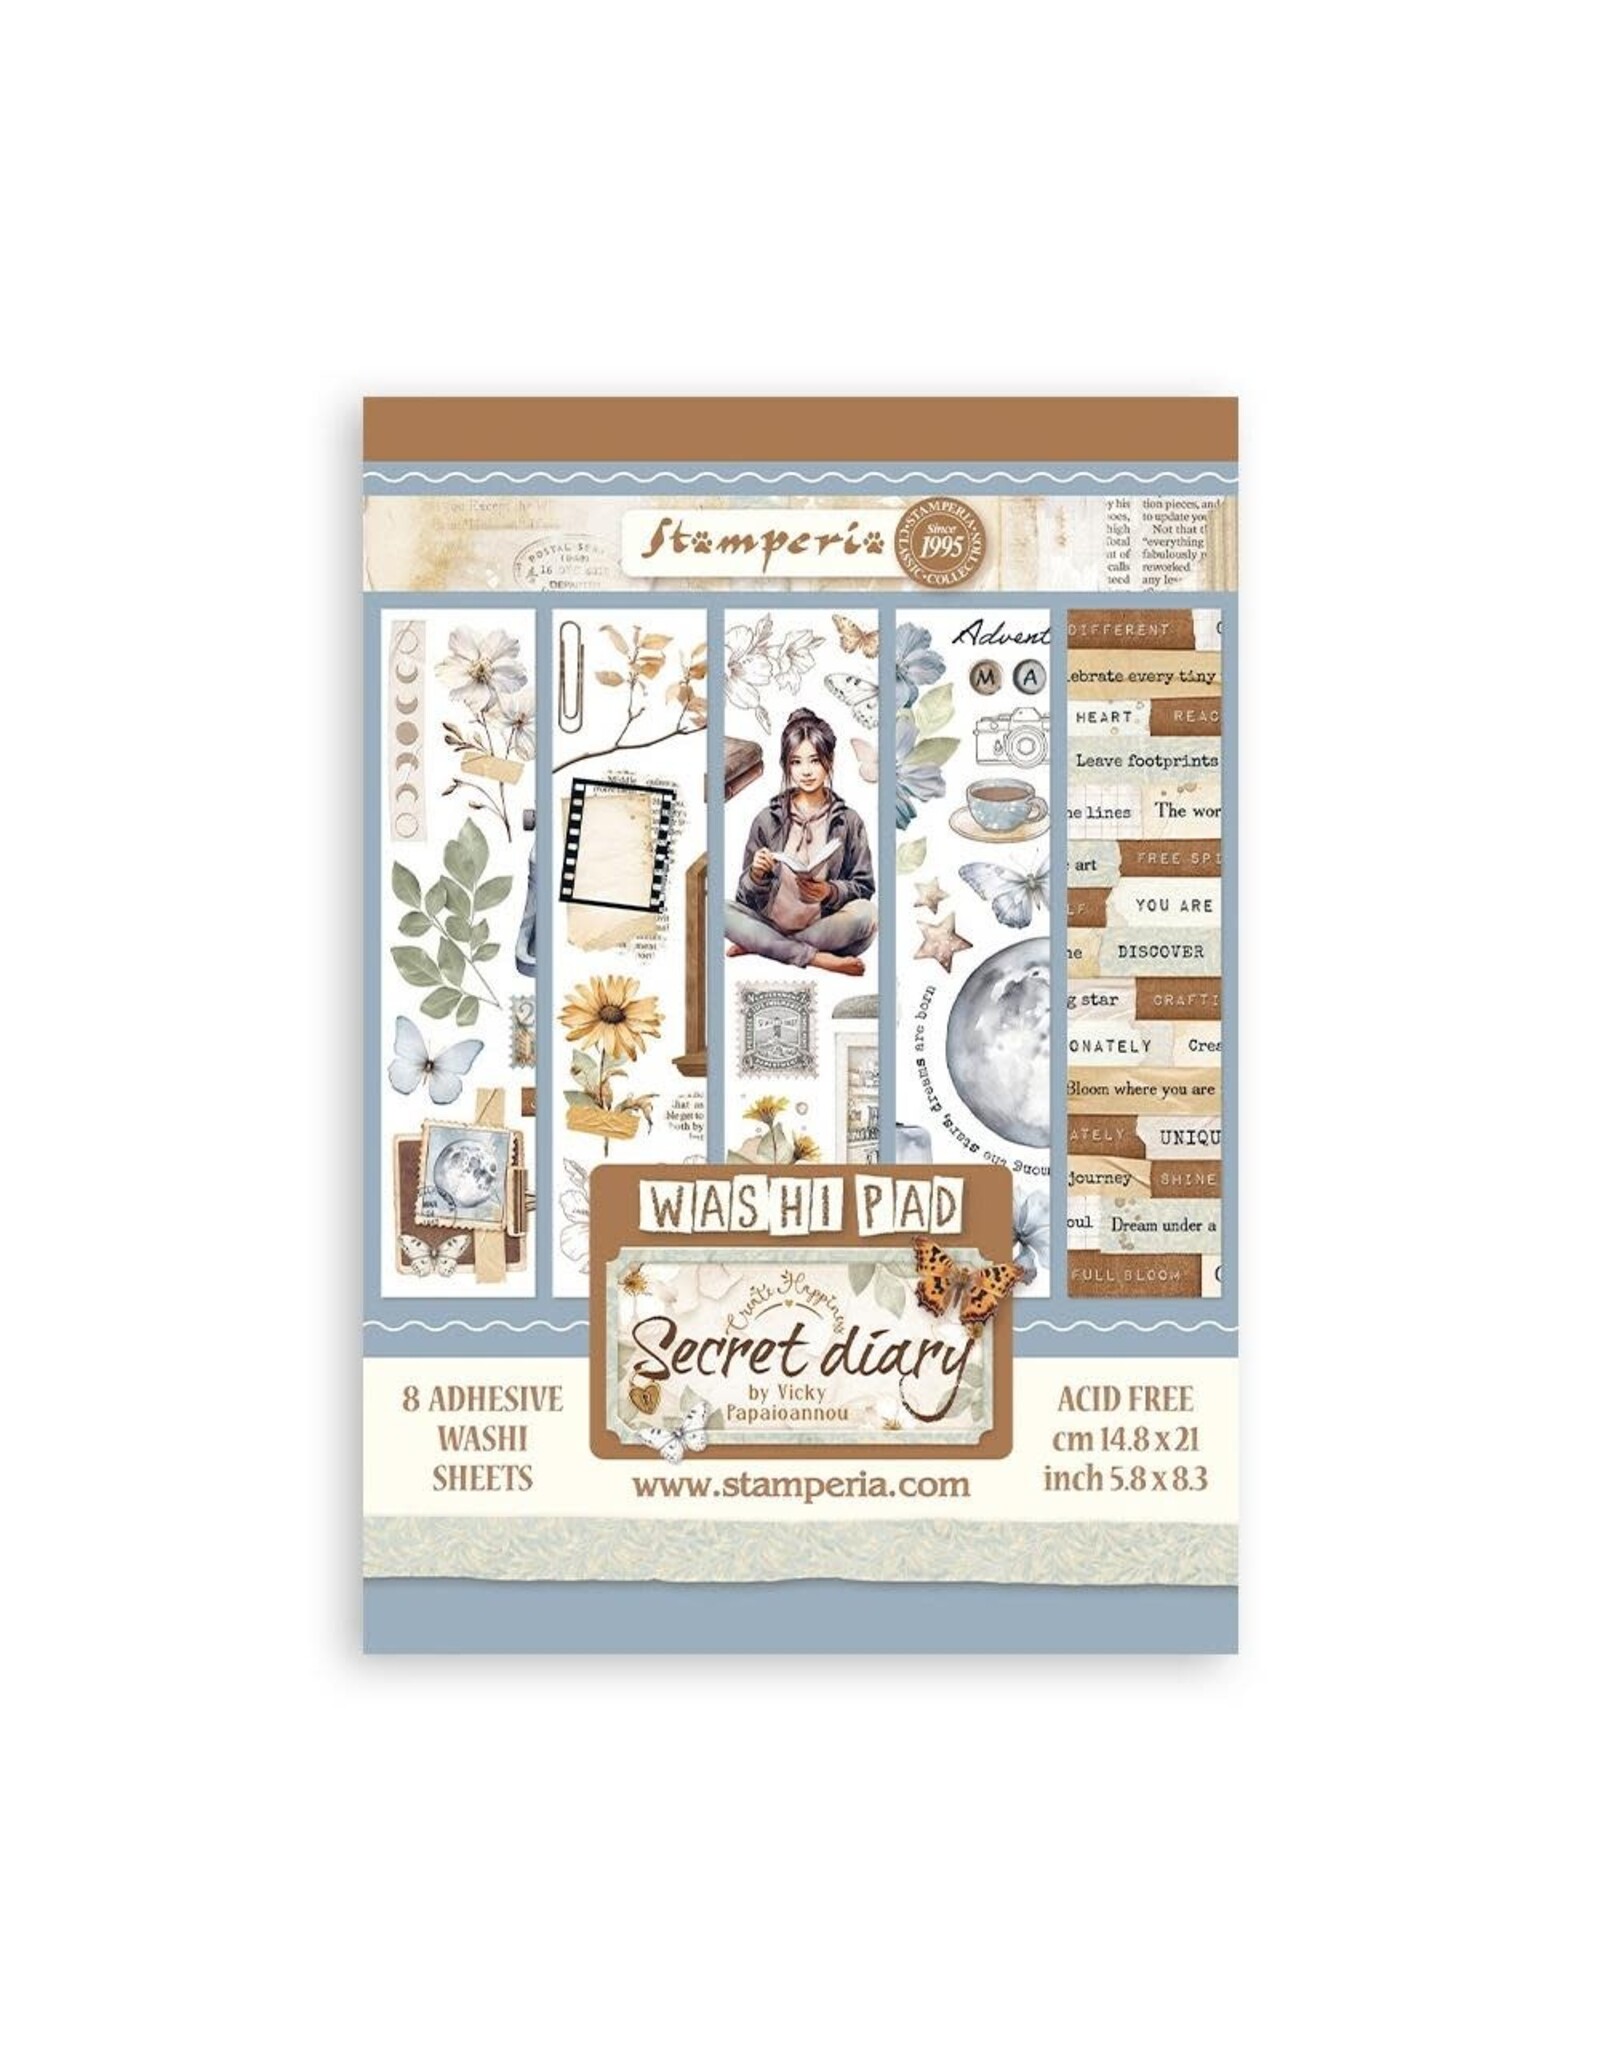 STAMPERIA STAMPERIA VICKY PAPAIOANNOU CREATE HAPPINESS SECRET DIARY WASHI PAD